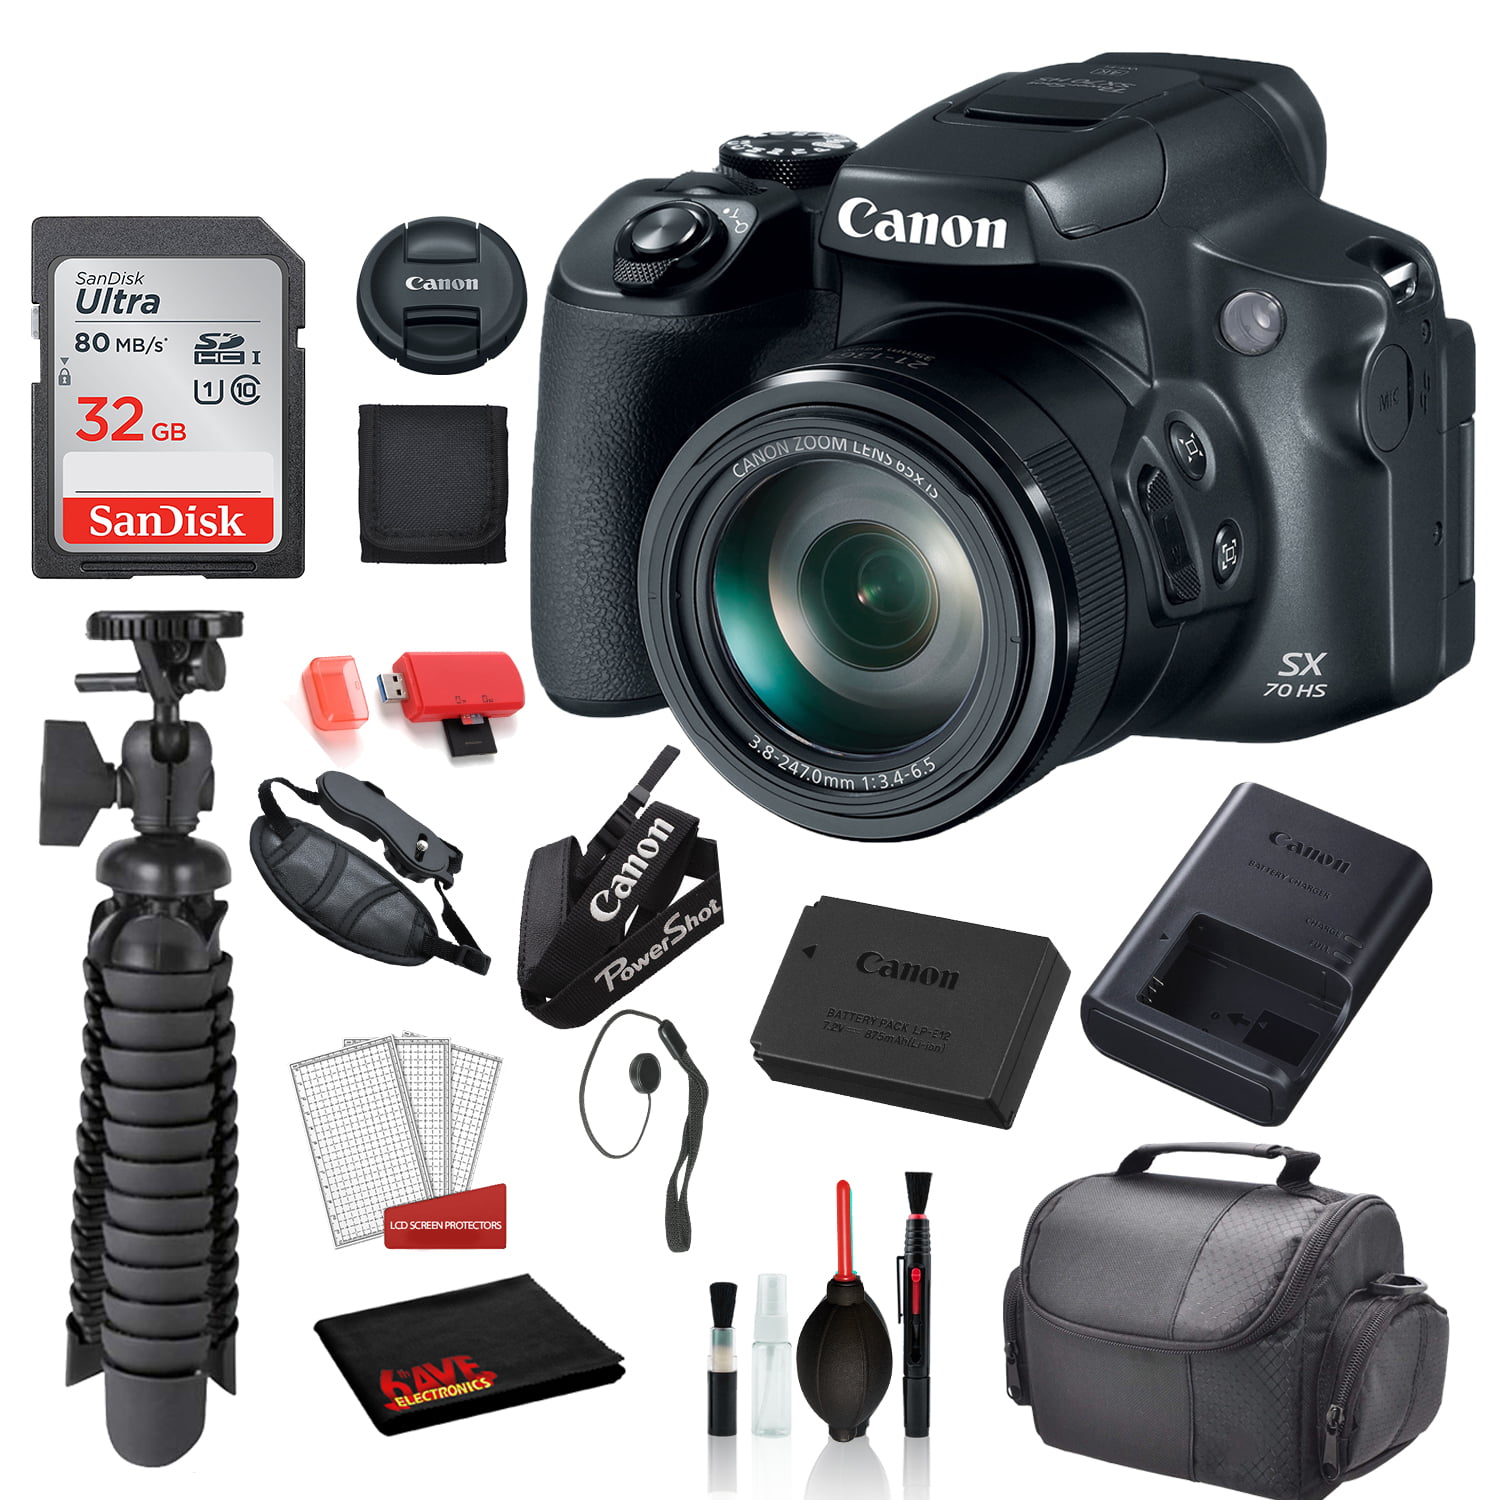 Canon SX70 HS Digital Camera (3071C001) with Bundle package deal 'SanDisk 32gb SD card + Deluxe Cleaning Kit + 12' Tripod + MORE - Walmart.com